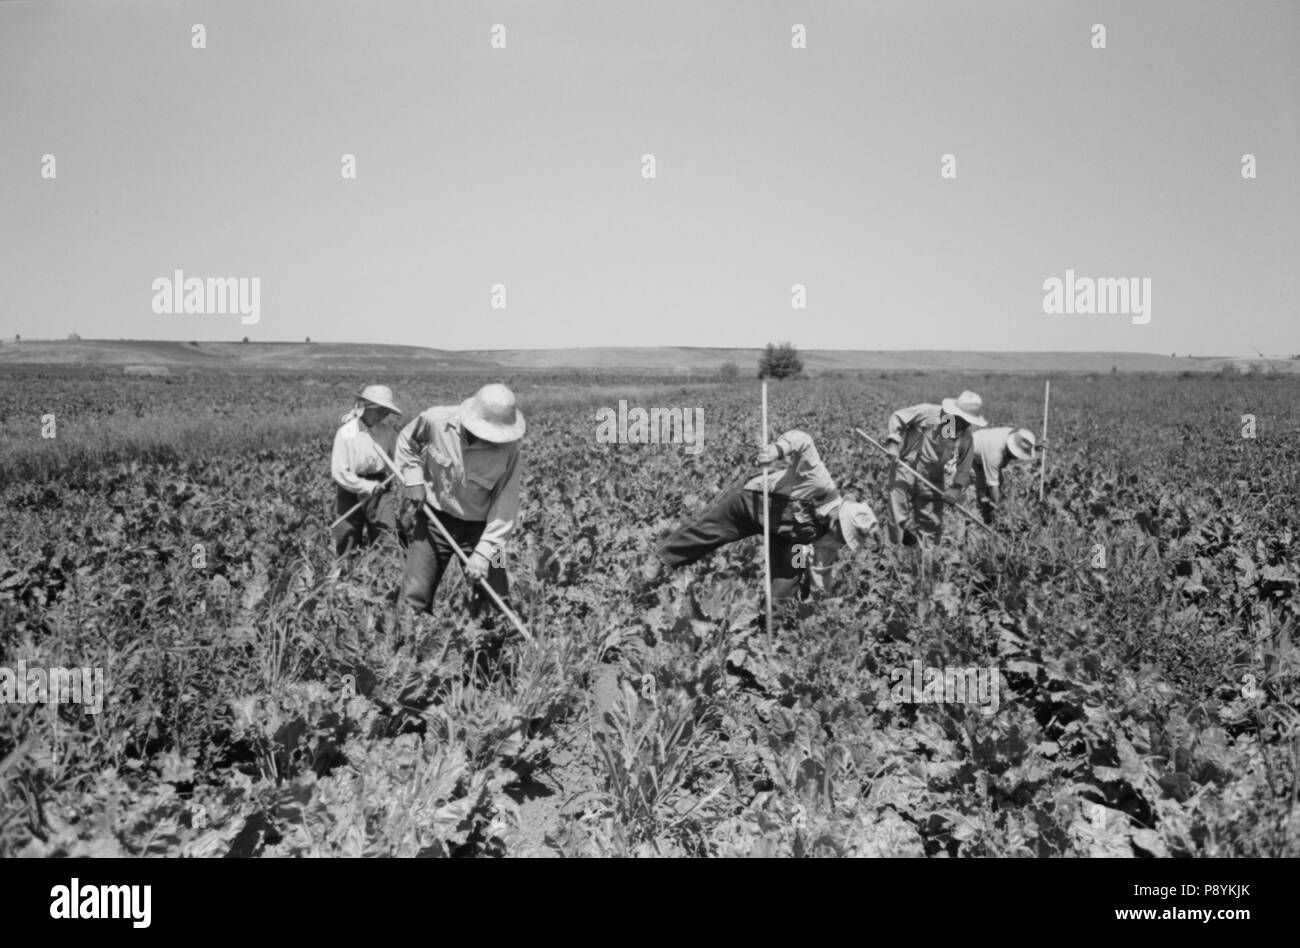 Japanese-American Farm Workers Working in Sugar Beet Field, Farm Security Administration (FSA) Mobile Camp, Nyssa, Oregon, USA, Russell Lee, Farm Security Administration, July 1942 Stock Photo